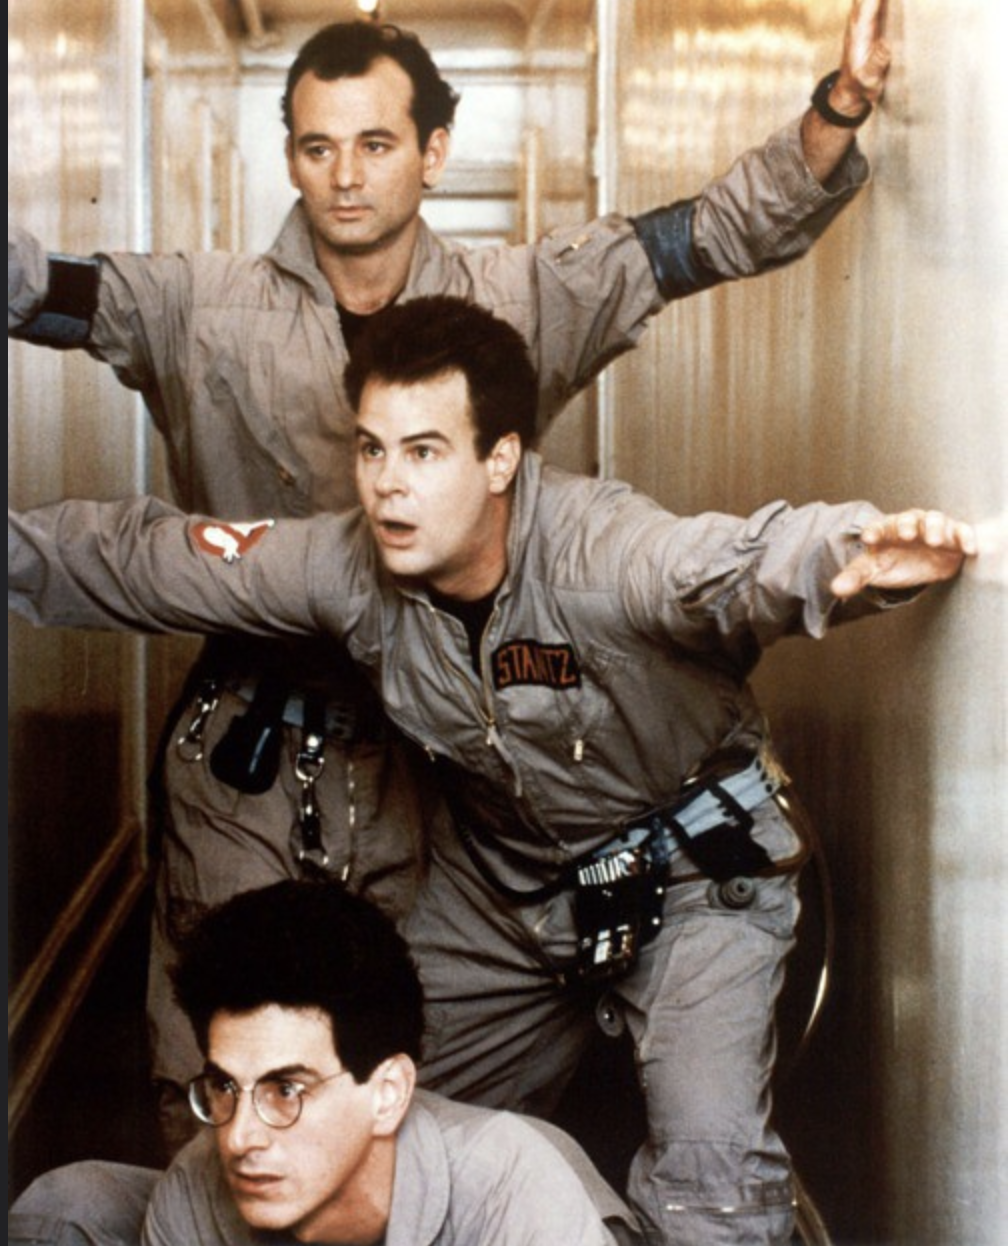 Three male characters from the Ghostbusters movie standing in hallway